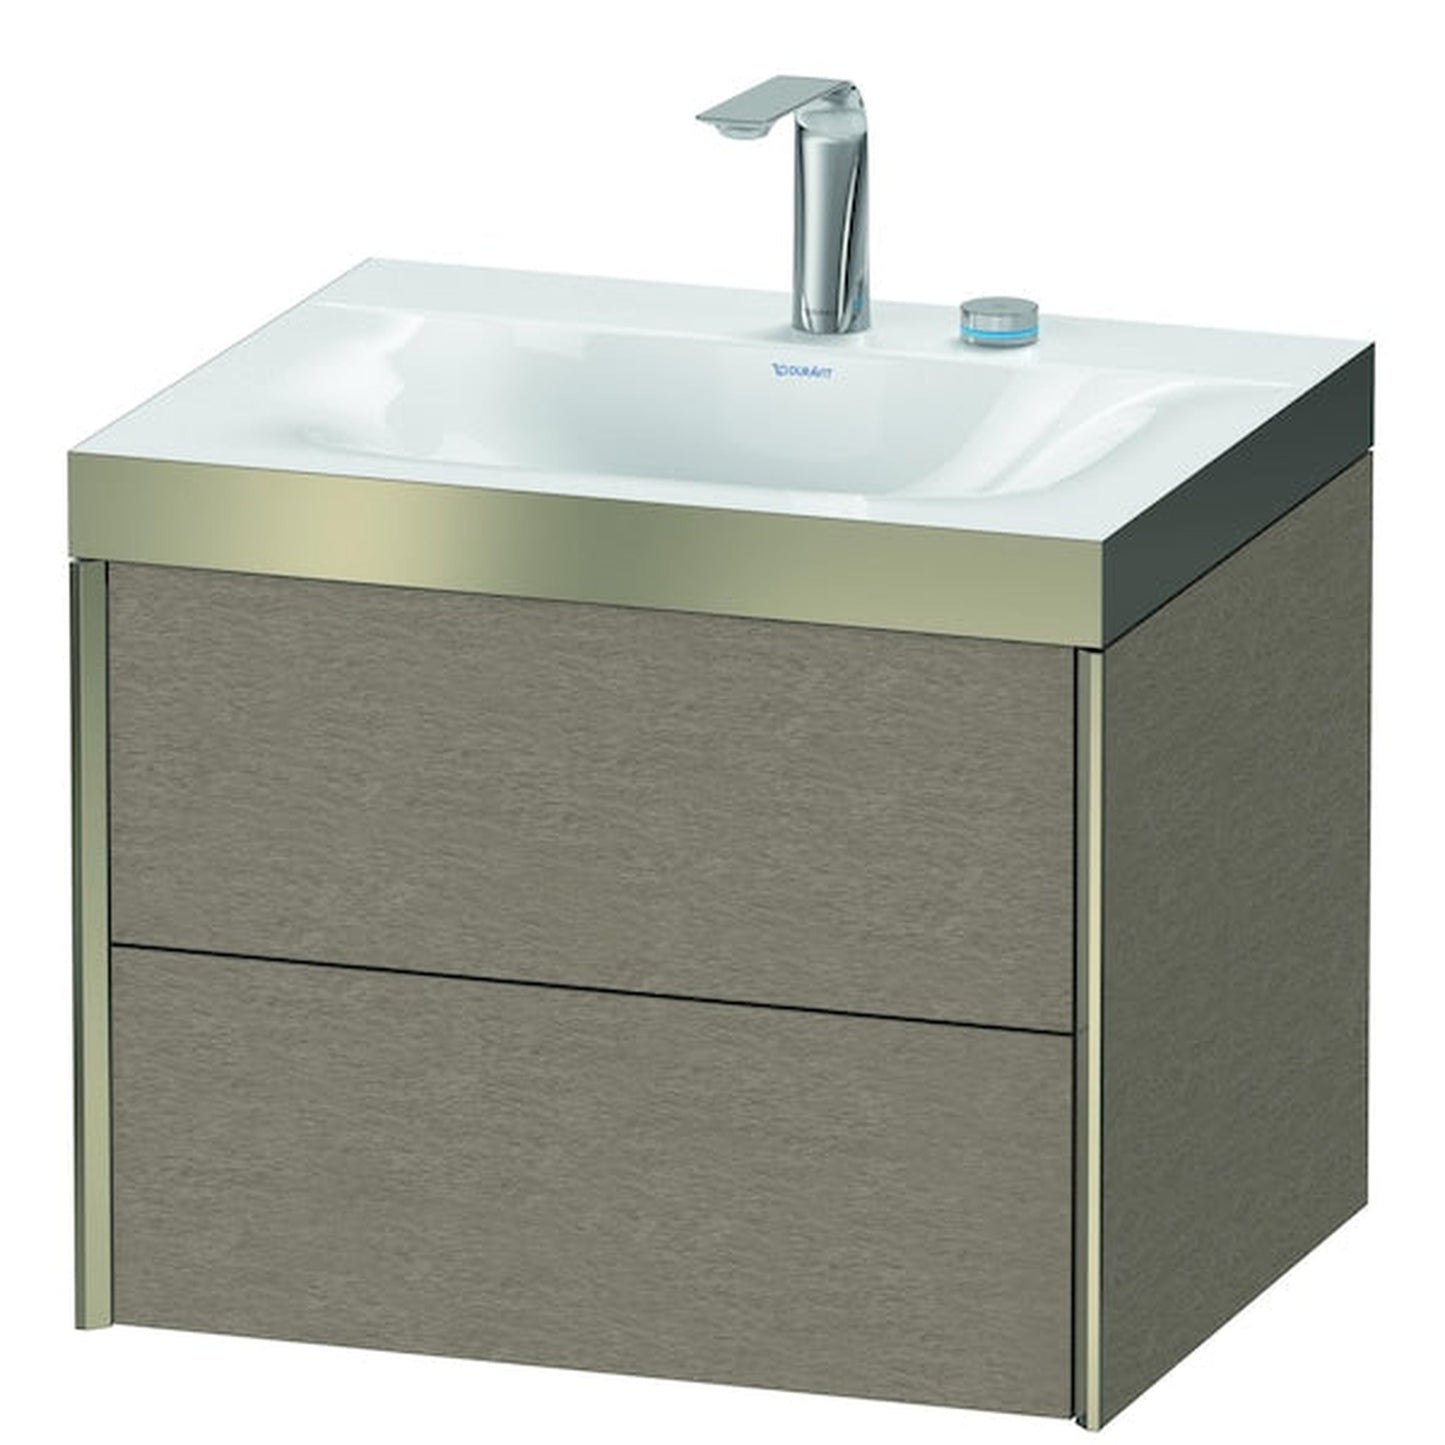 Duravit Xviu 24" x 20" x 19" Two Drawer C-Bonded Wall-Mount Vanity Kit With Two Tap Holes, Cashmere Oak (XV4614EB111P)